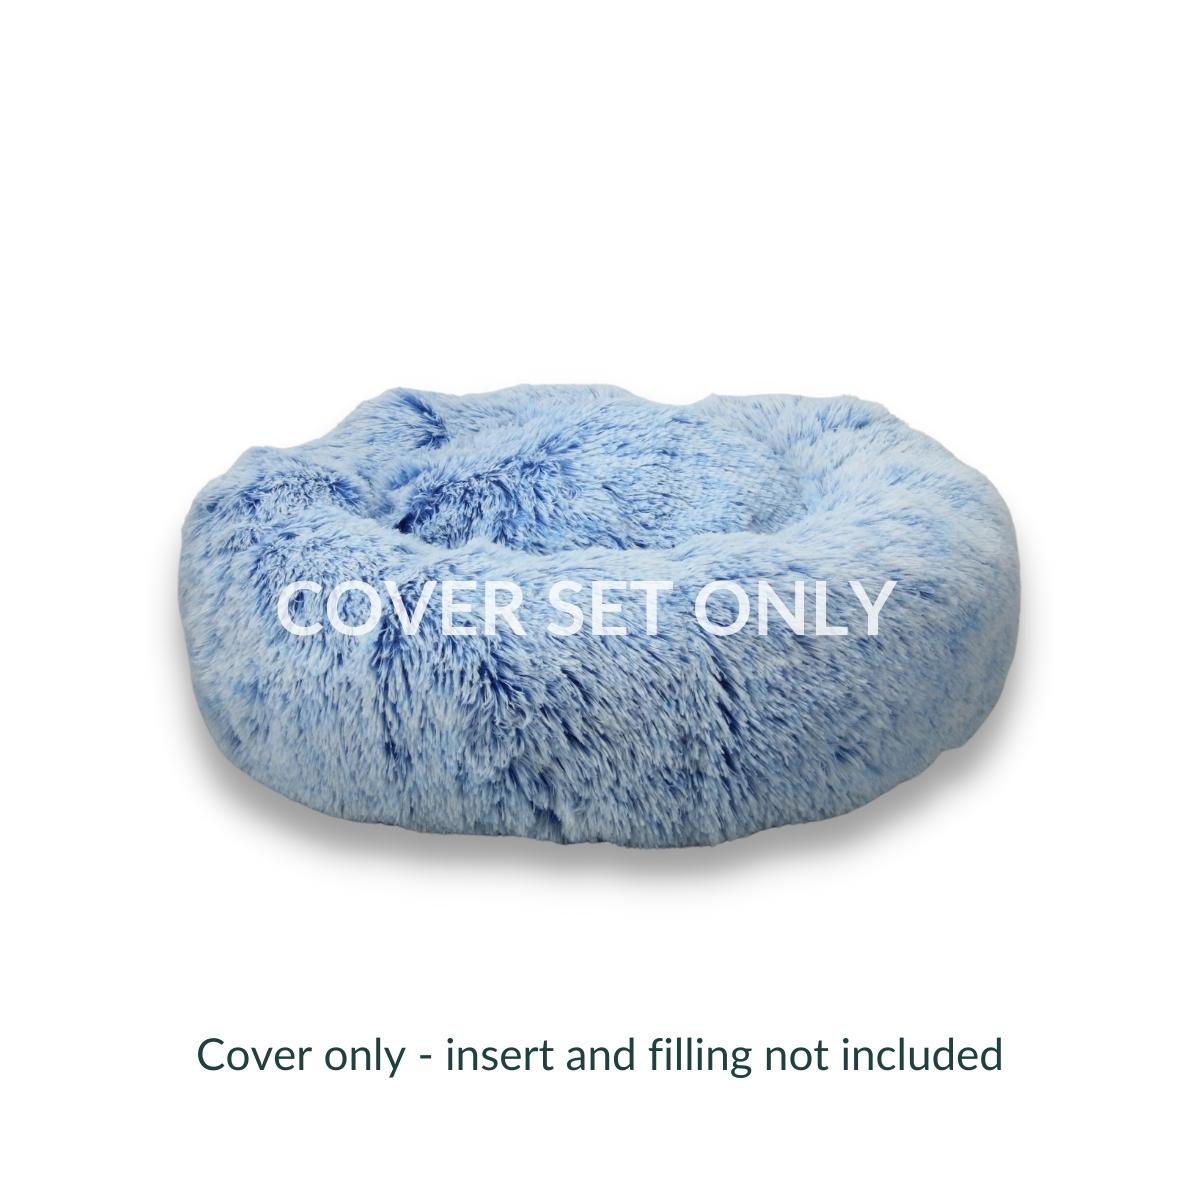 Spare Calming Dog Bed Cover